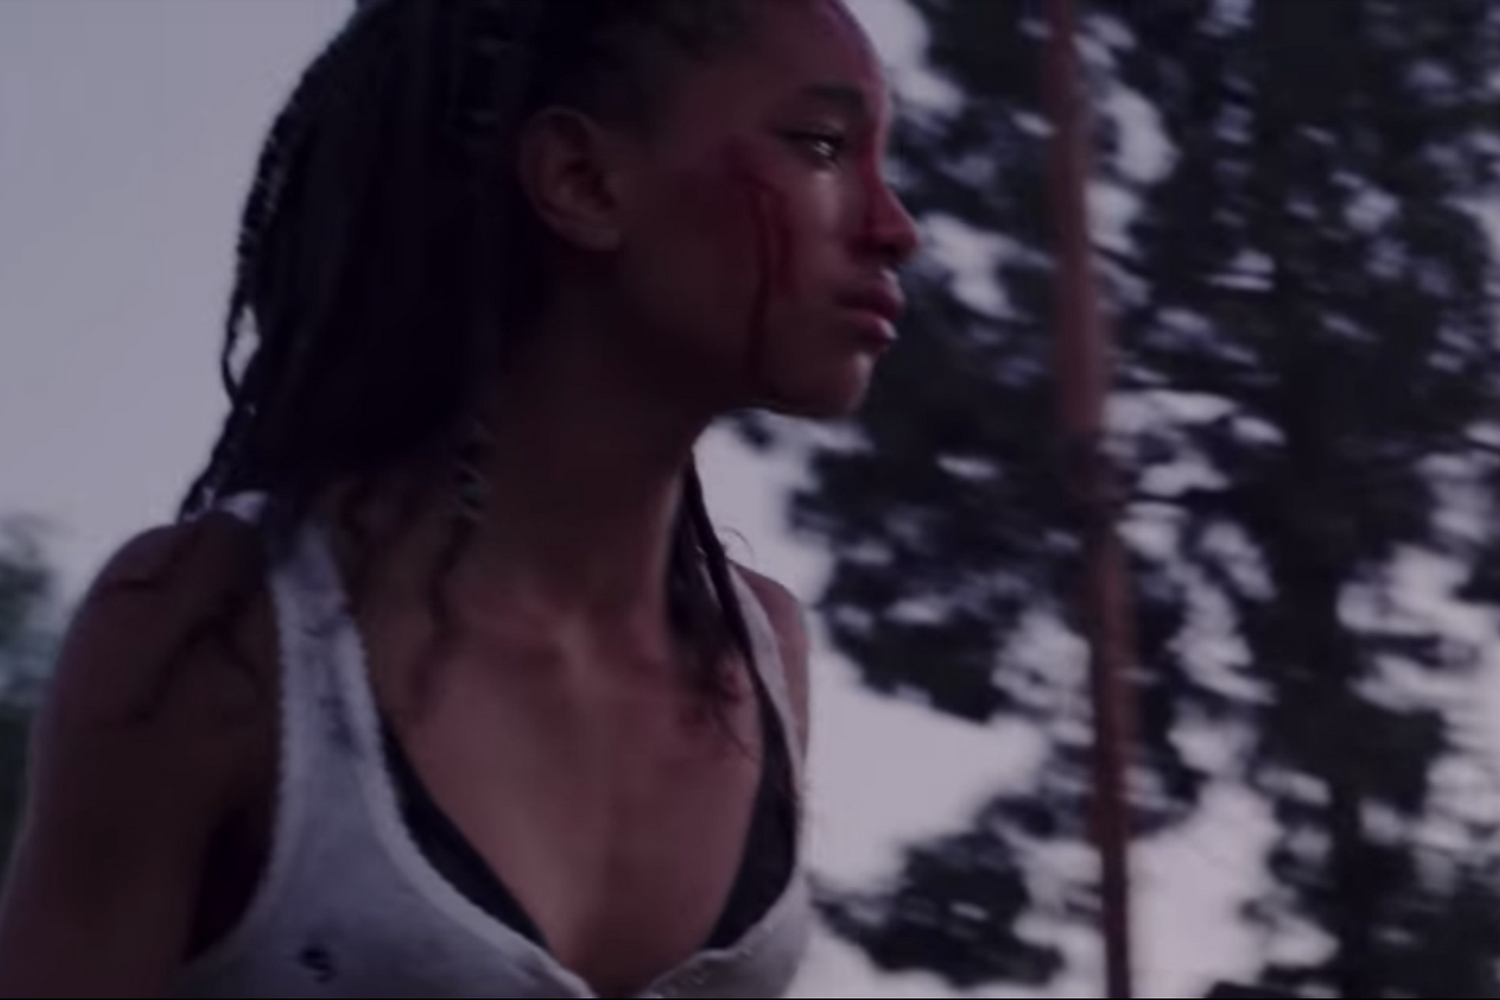 Watch Zhu and Tame Impala’s video for ‘My Life’, starring Willow Smith